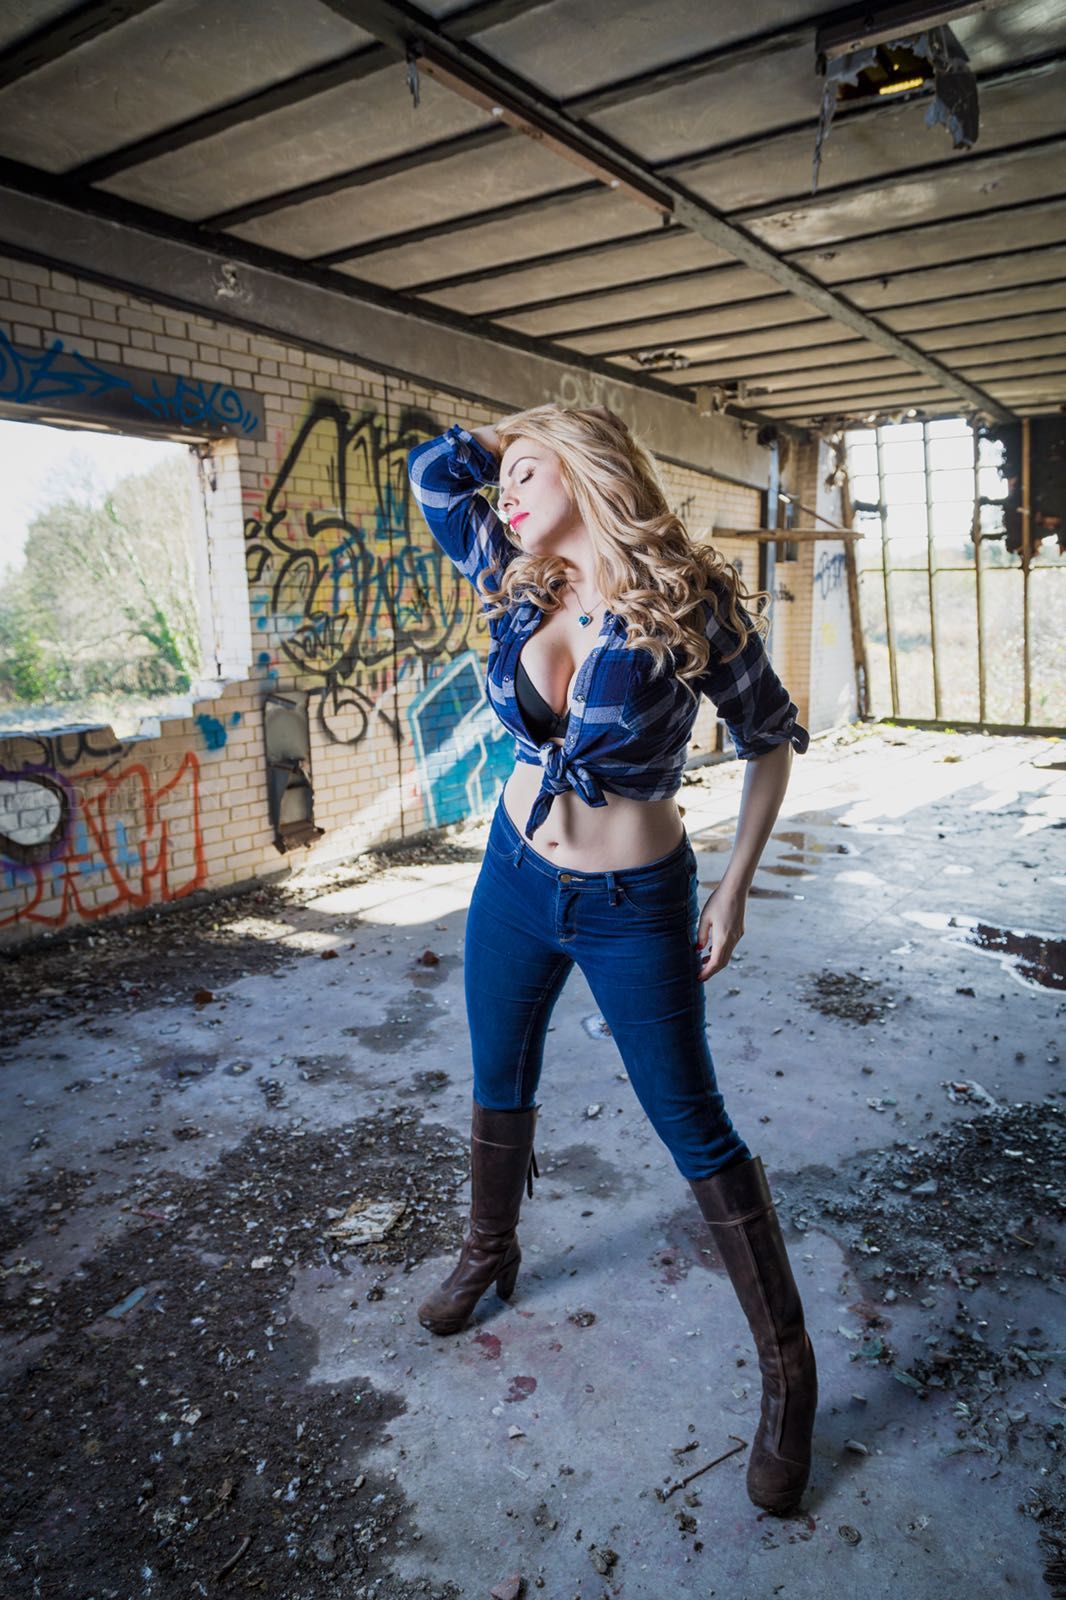 fashion model in derelict building wearing blue jeans ans shirt with long leather boots 